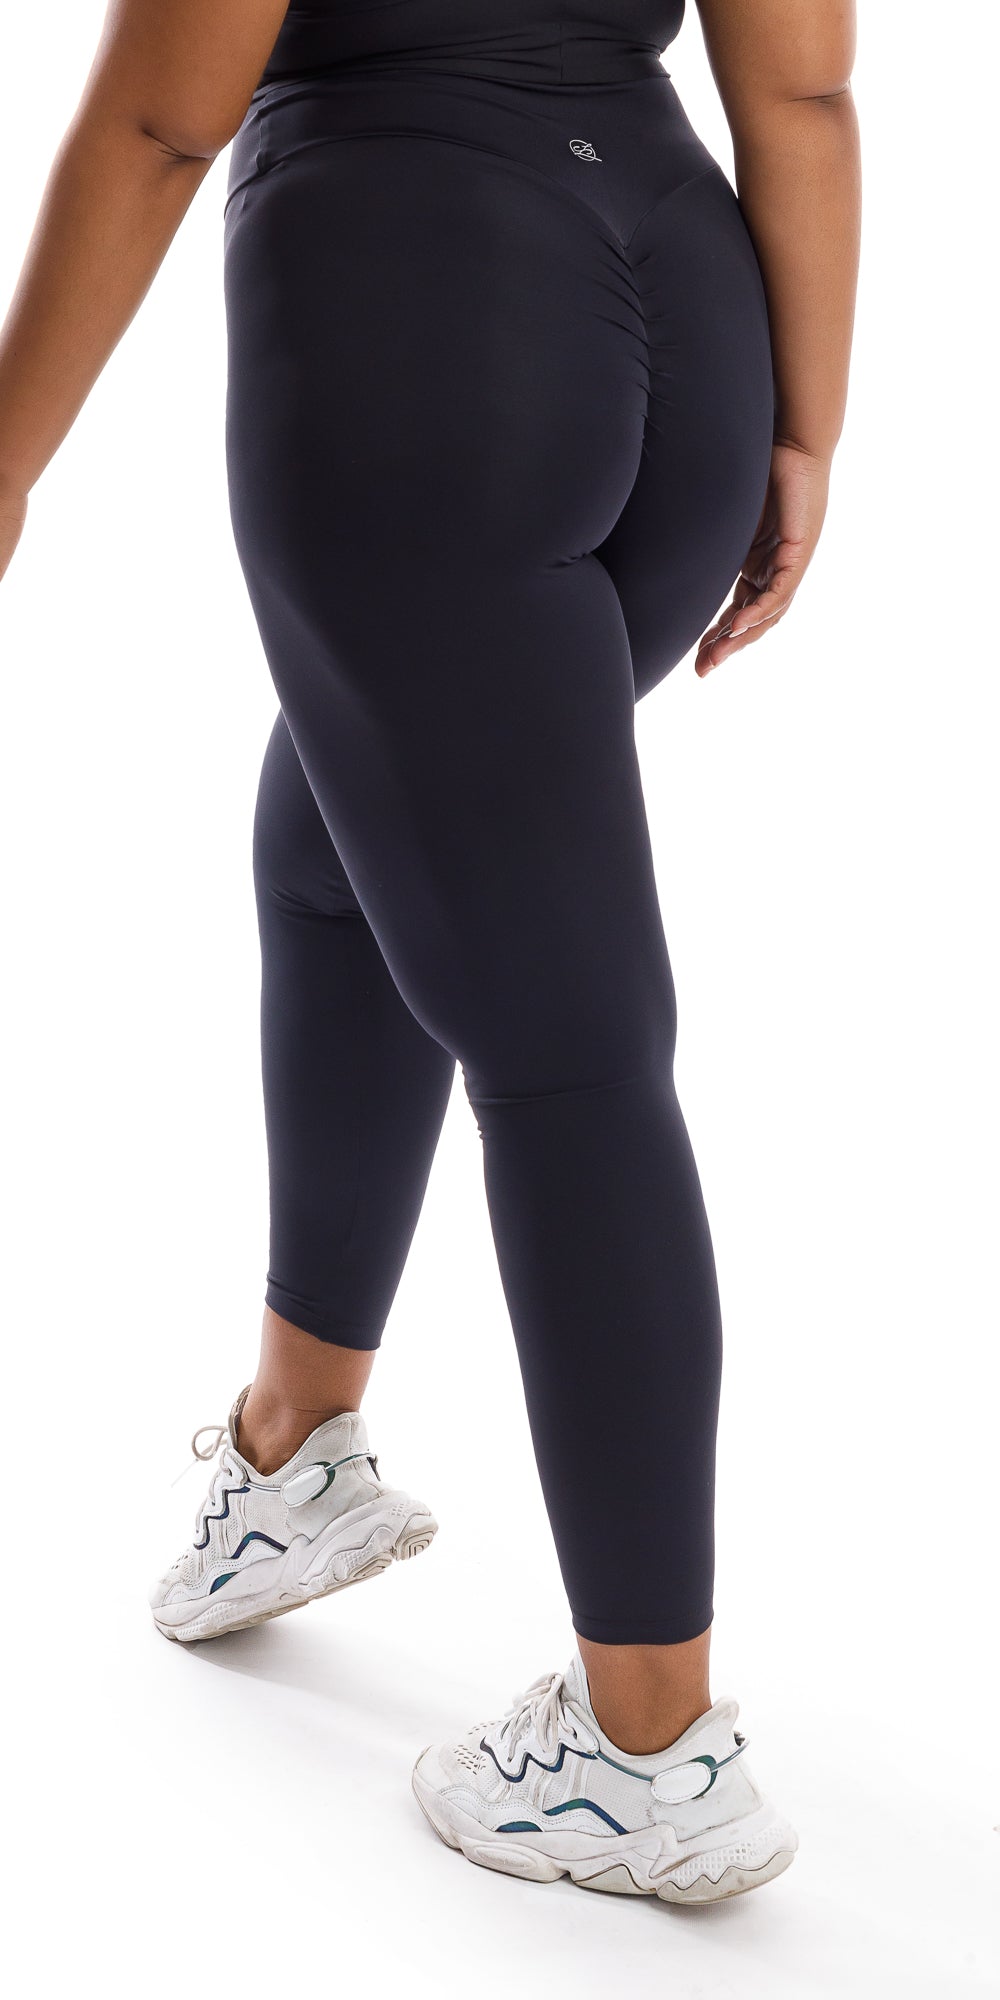 SCRUNCH BOOTY WORKOUT LEGGINGS FOR THICK and CURVY WOMEN